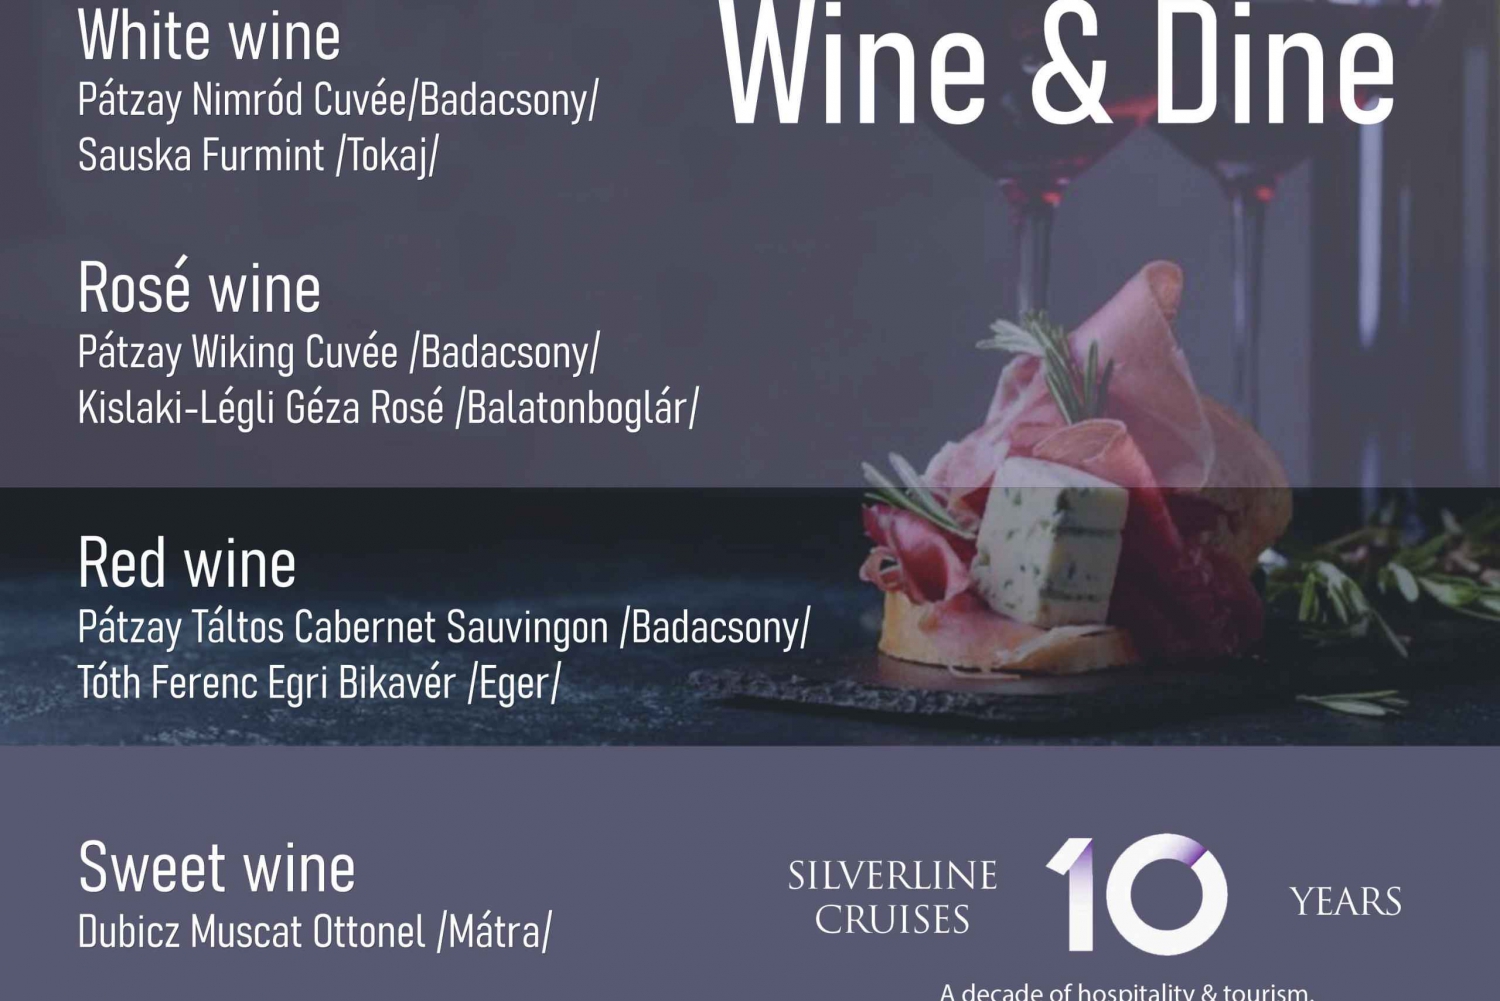 Budapest: Wine & Dine Evening Cruise with Live Piano Concert